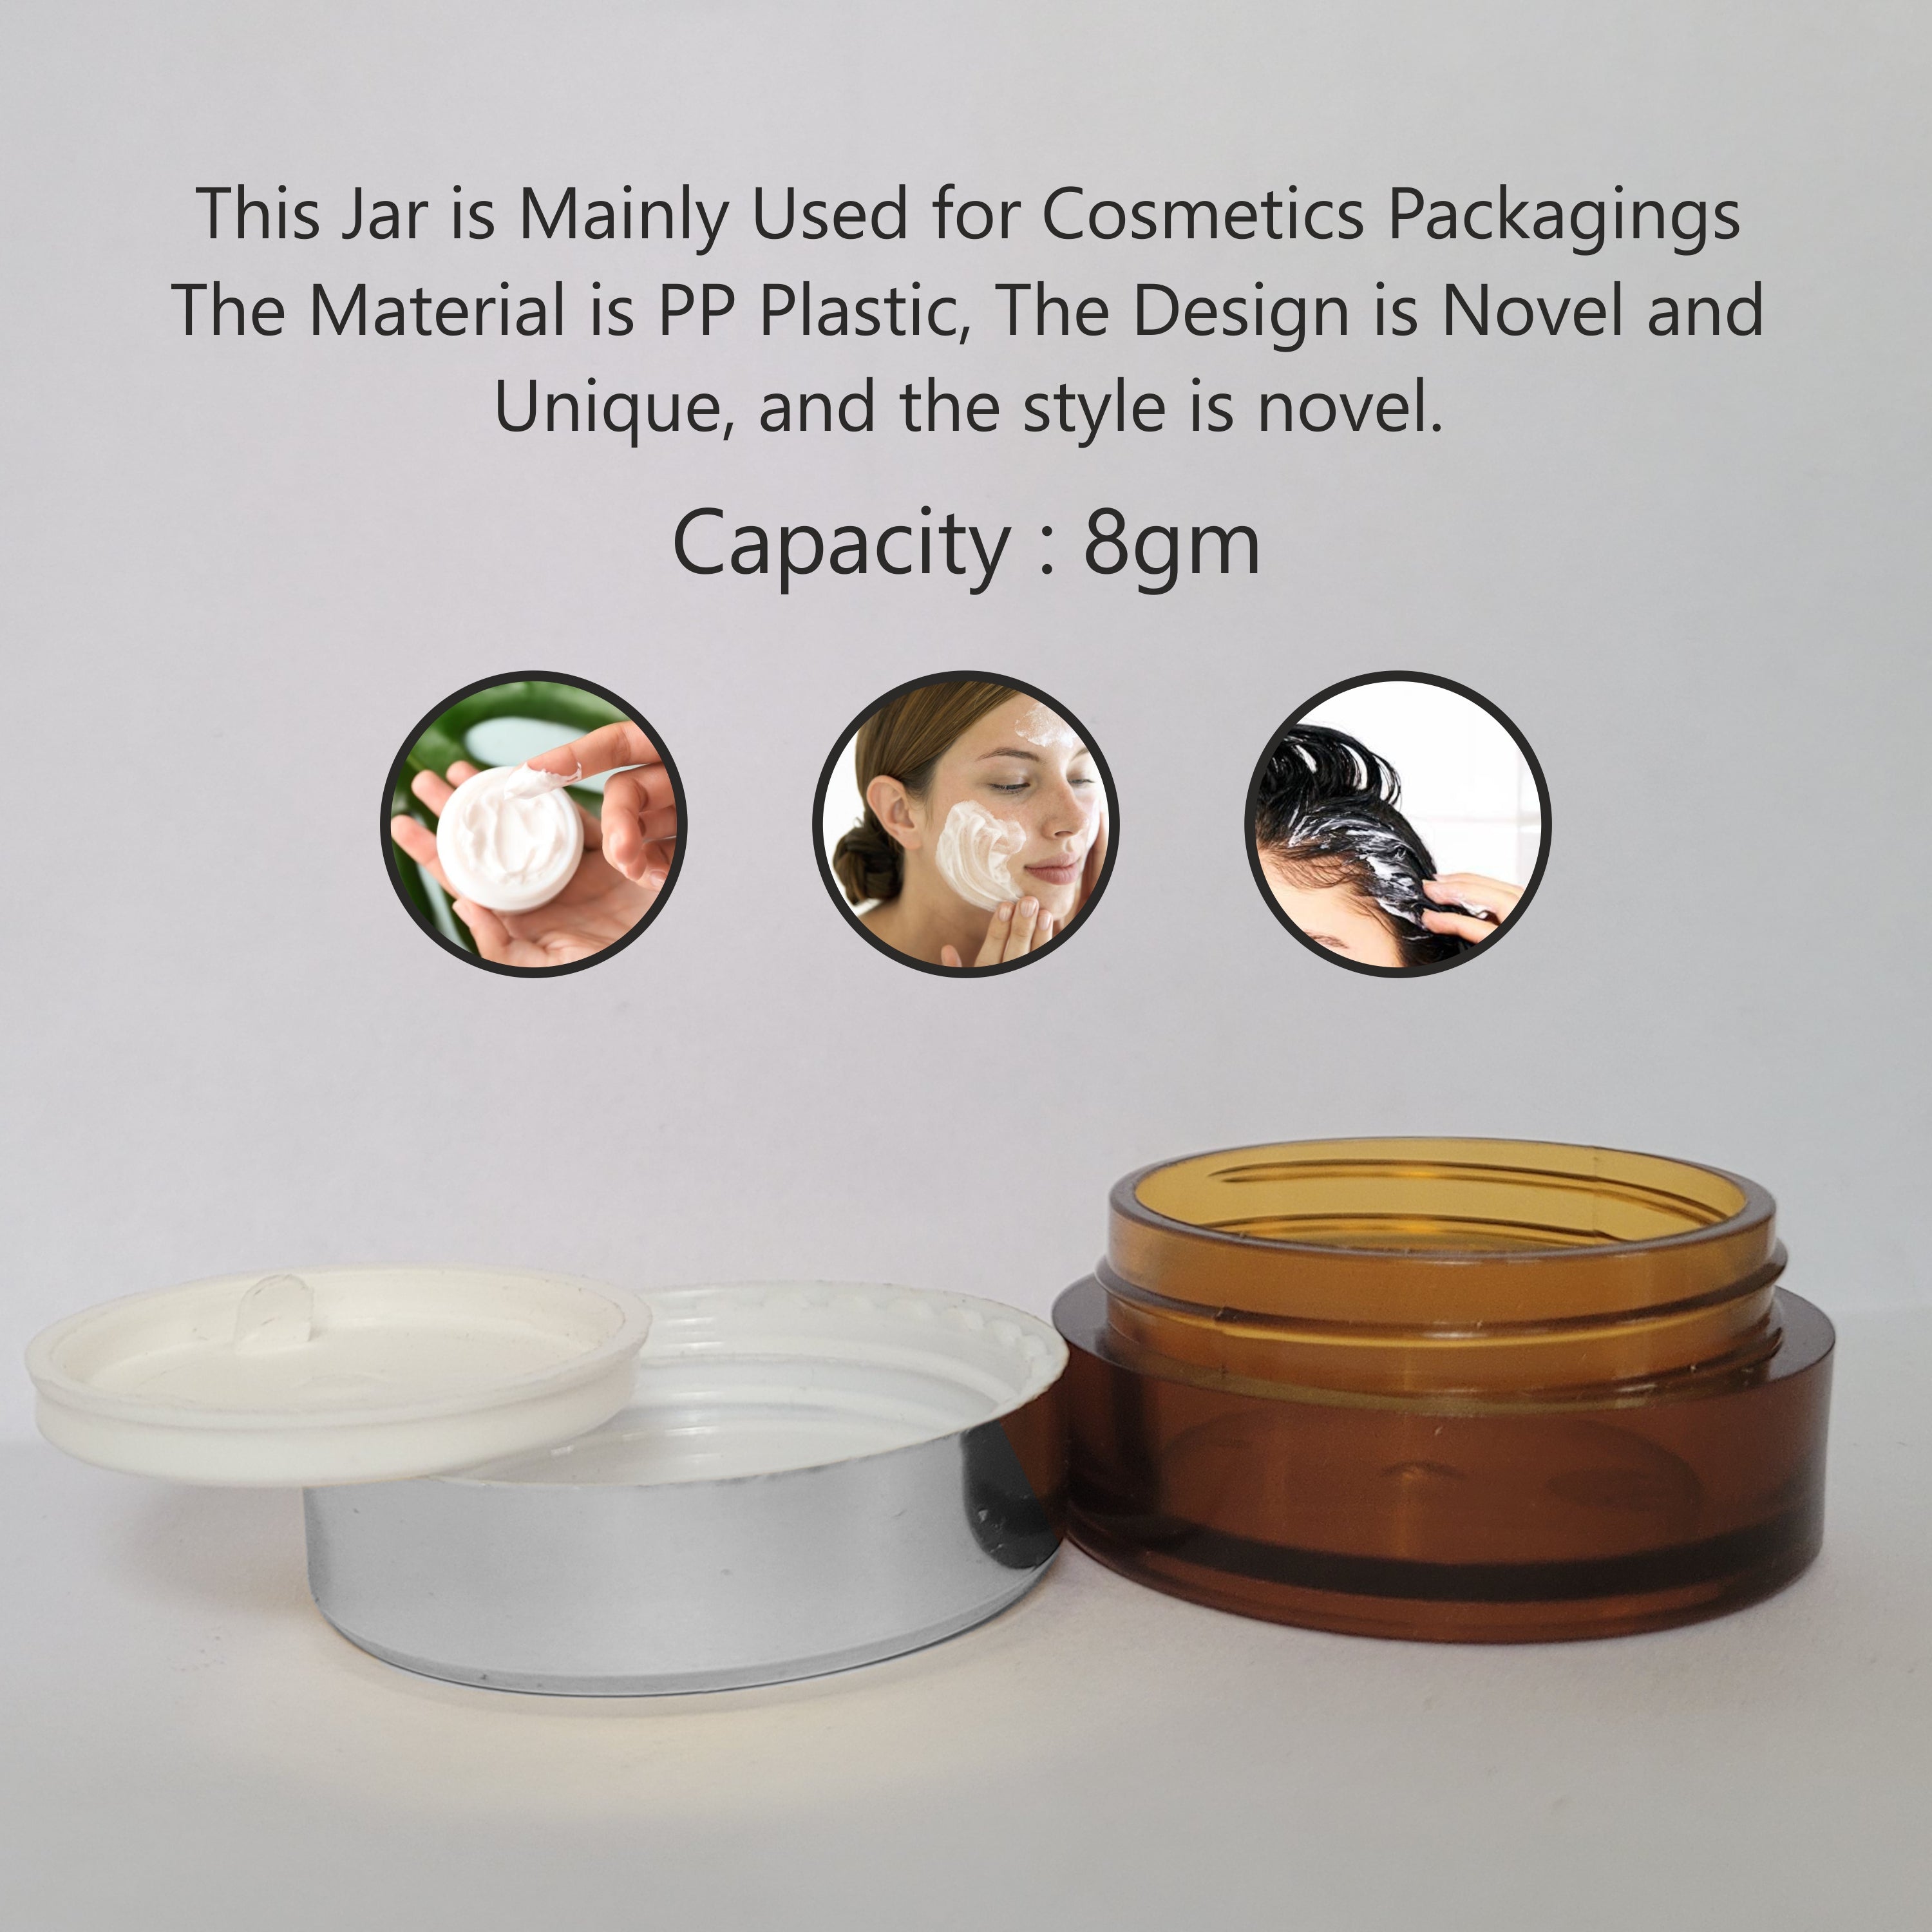 Zenvista, Zenvista packaging,cosmetic packaging, empty cosmetic packaging, jars, empty jars, empty jars for packging, amber color jars, airtight jars, travel friendly jars, jars for cosmetics, cosmetic containers 